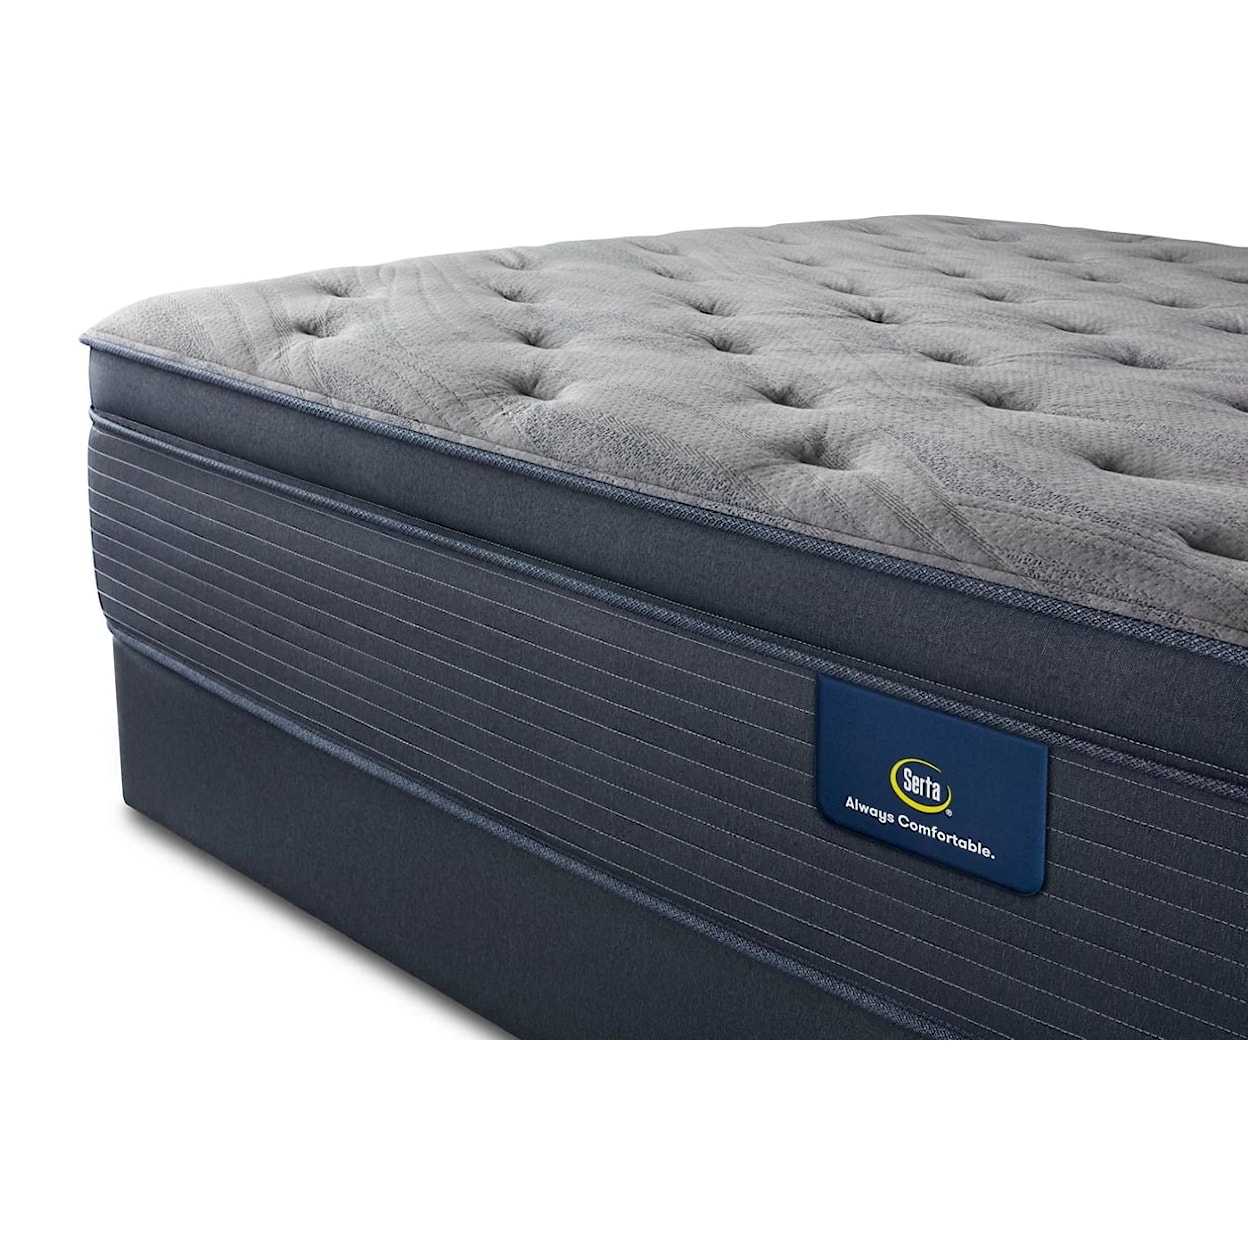 Serta Soothing Rest Soothing Rest Plush PT Twin XL Mattress